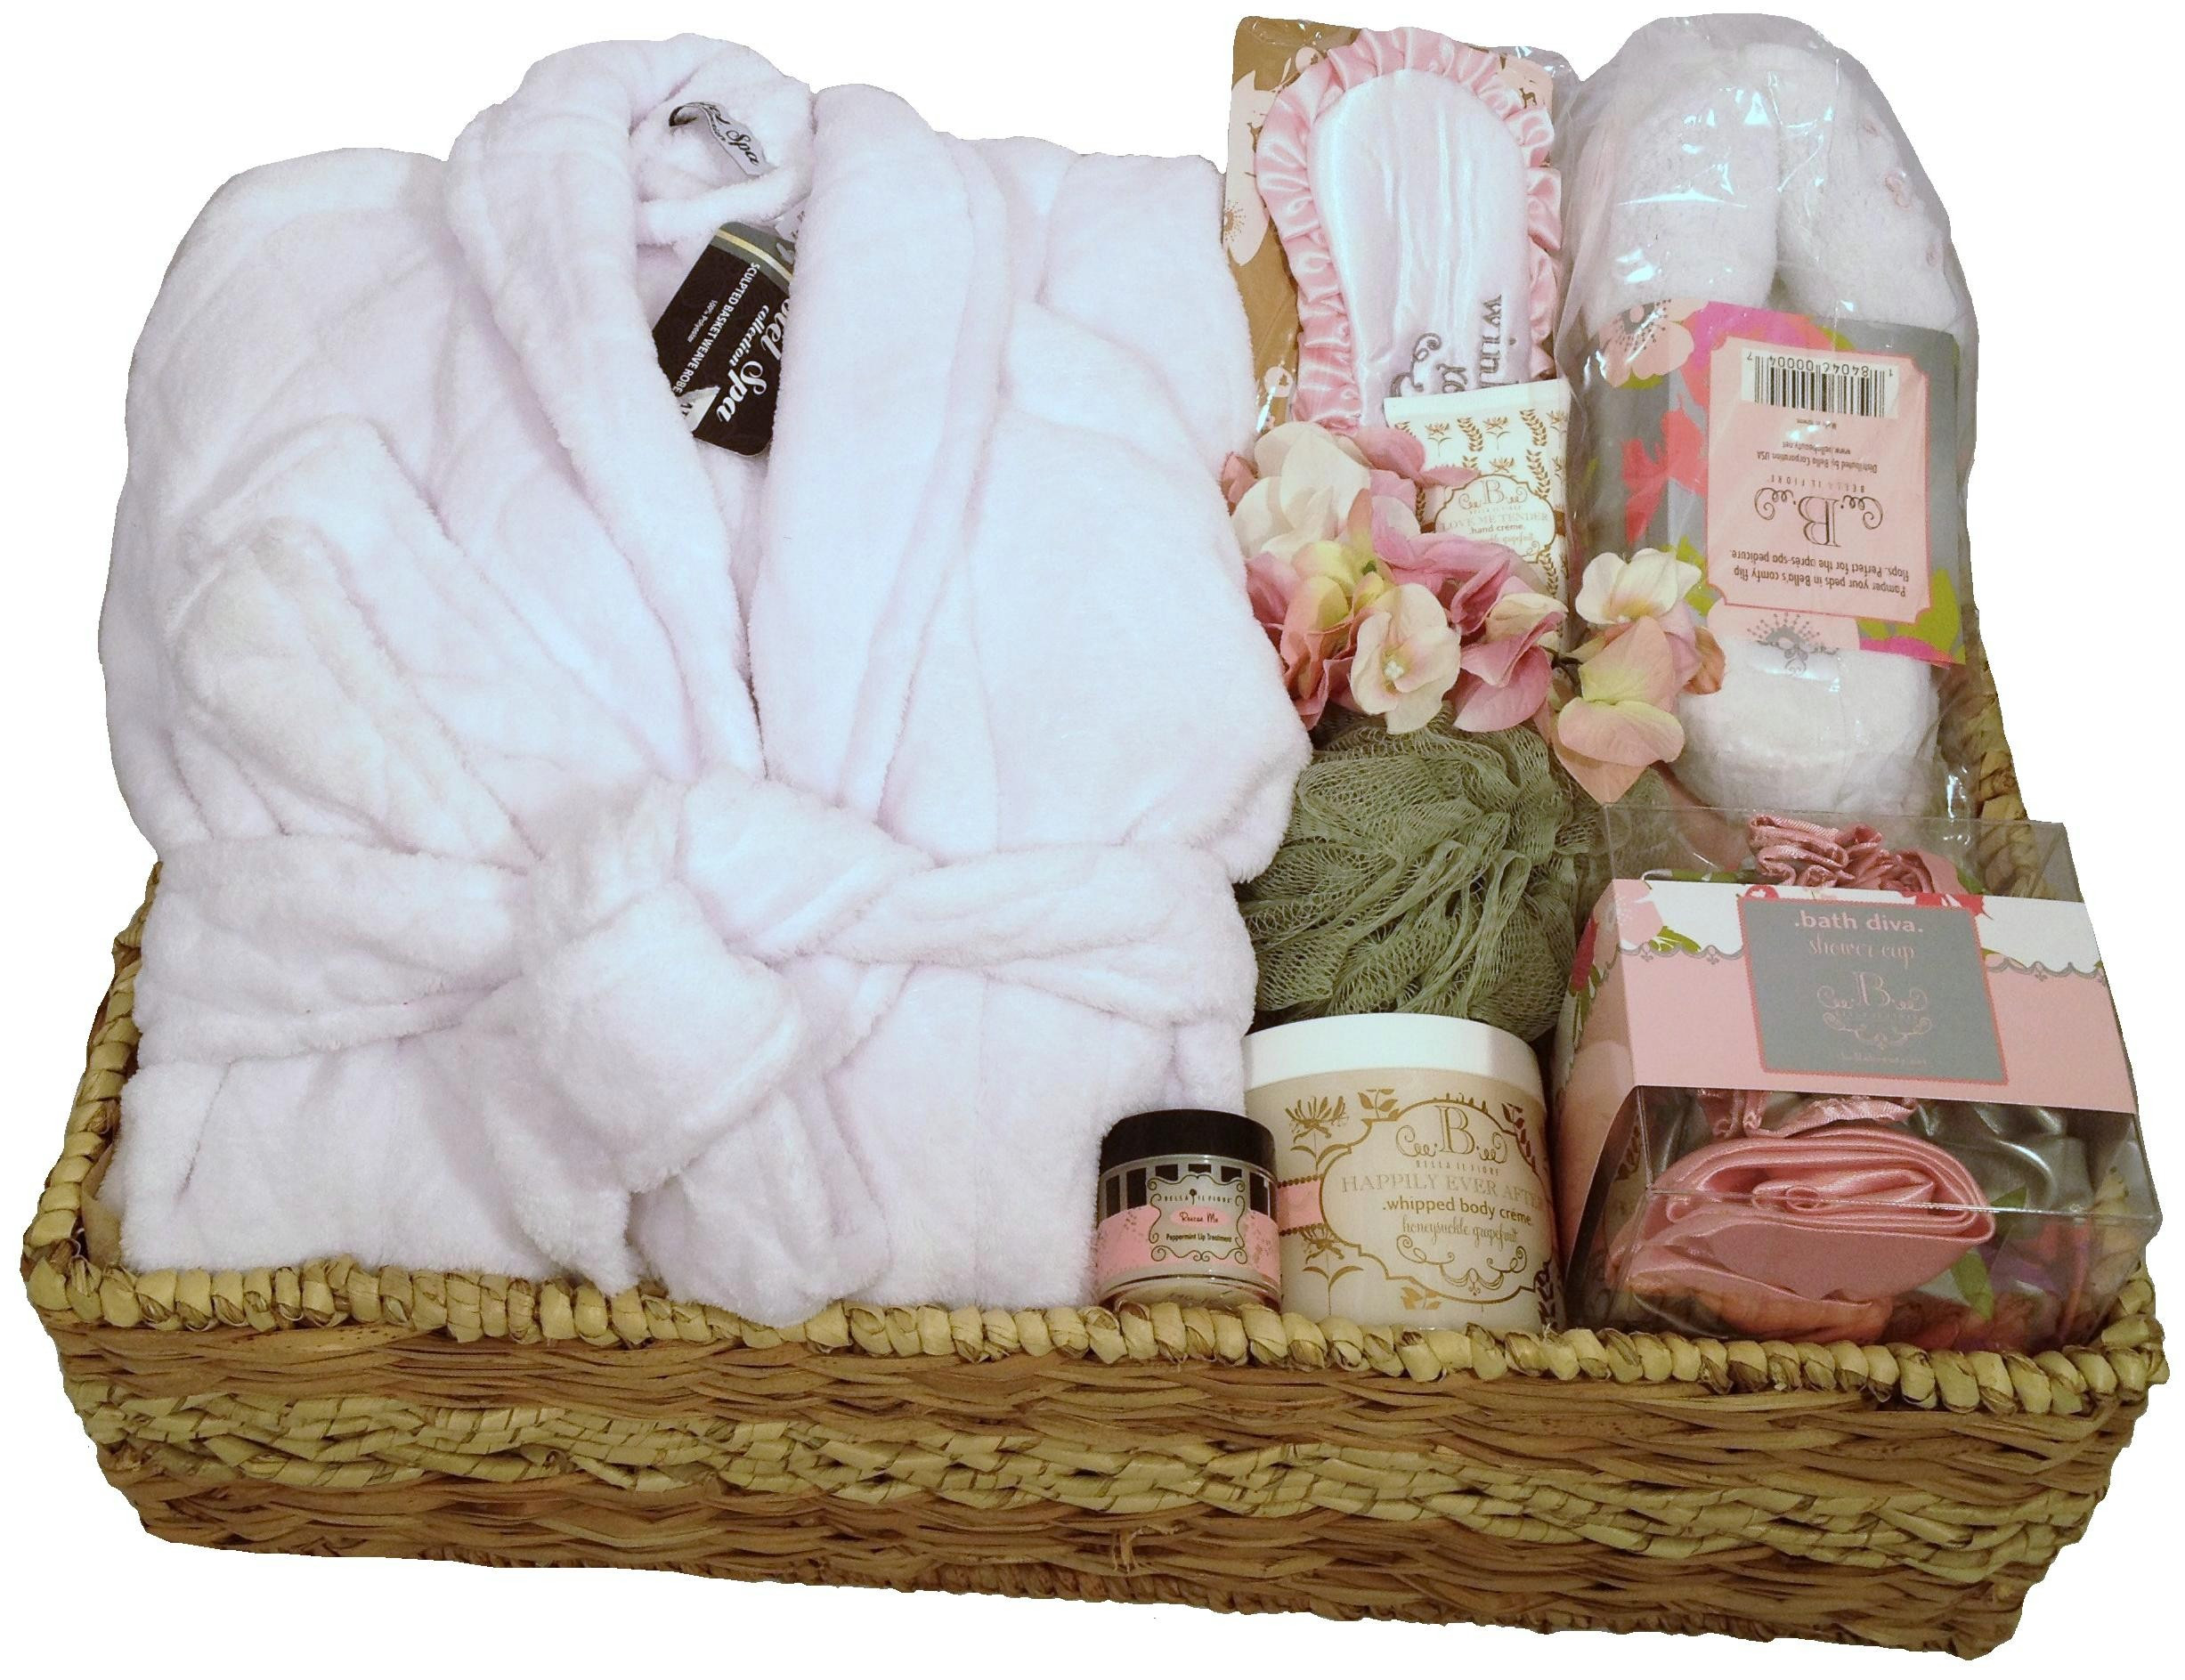 Spa Basket Gift Ideas
 DELUXE HOTEL SPA GIFT BASKET Sweet Day Designs